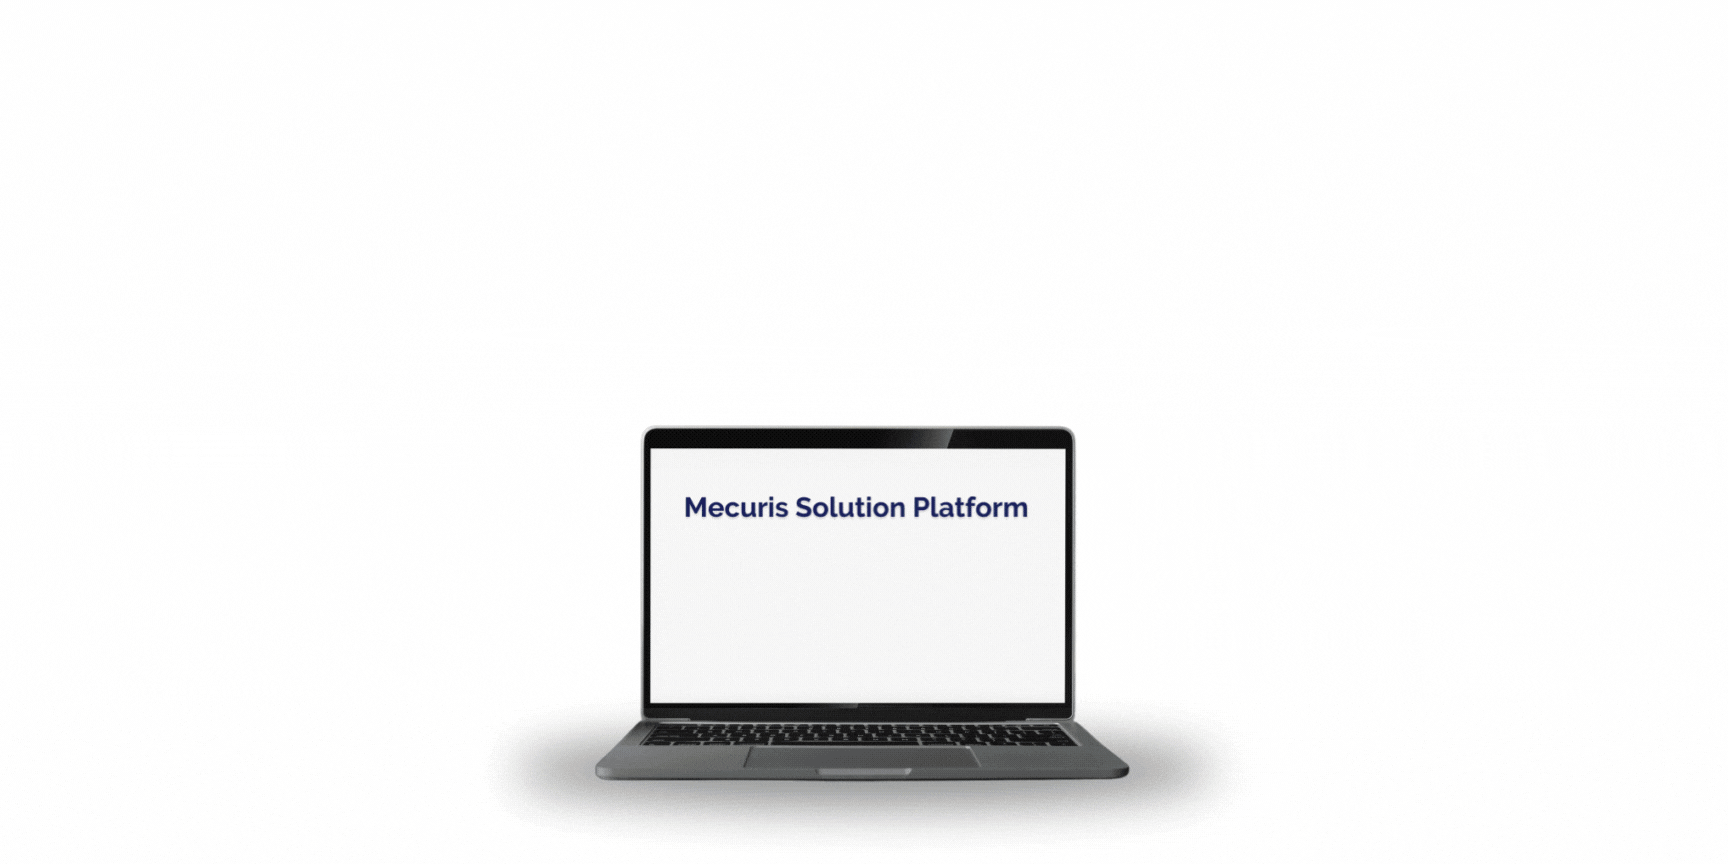 3 powerful tools of the Mecuris Solution Platform